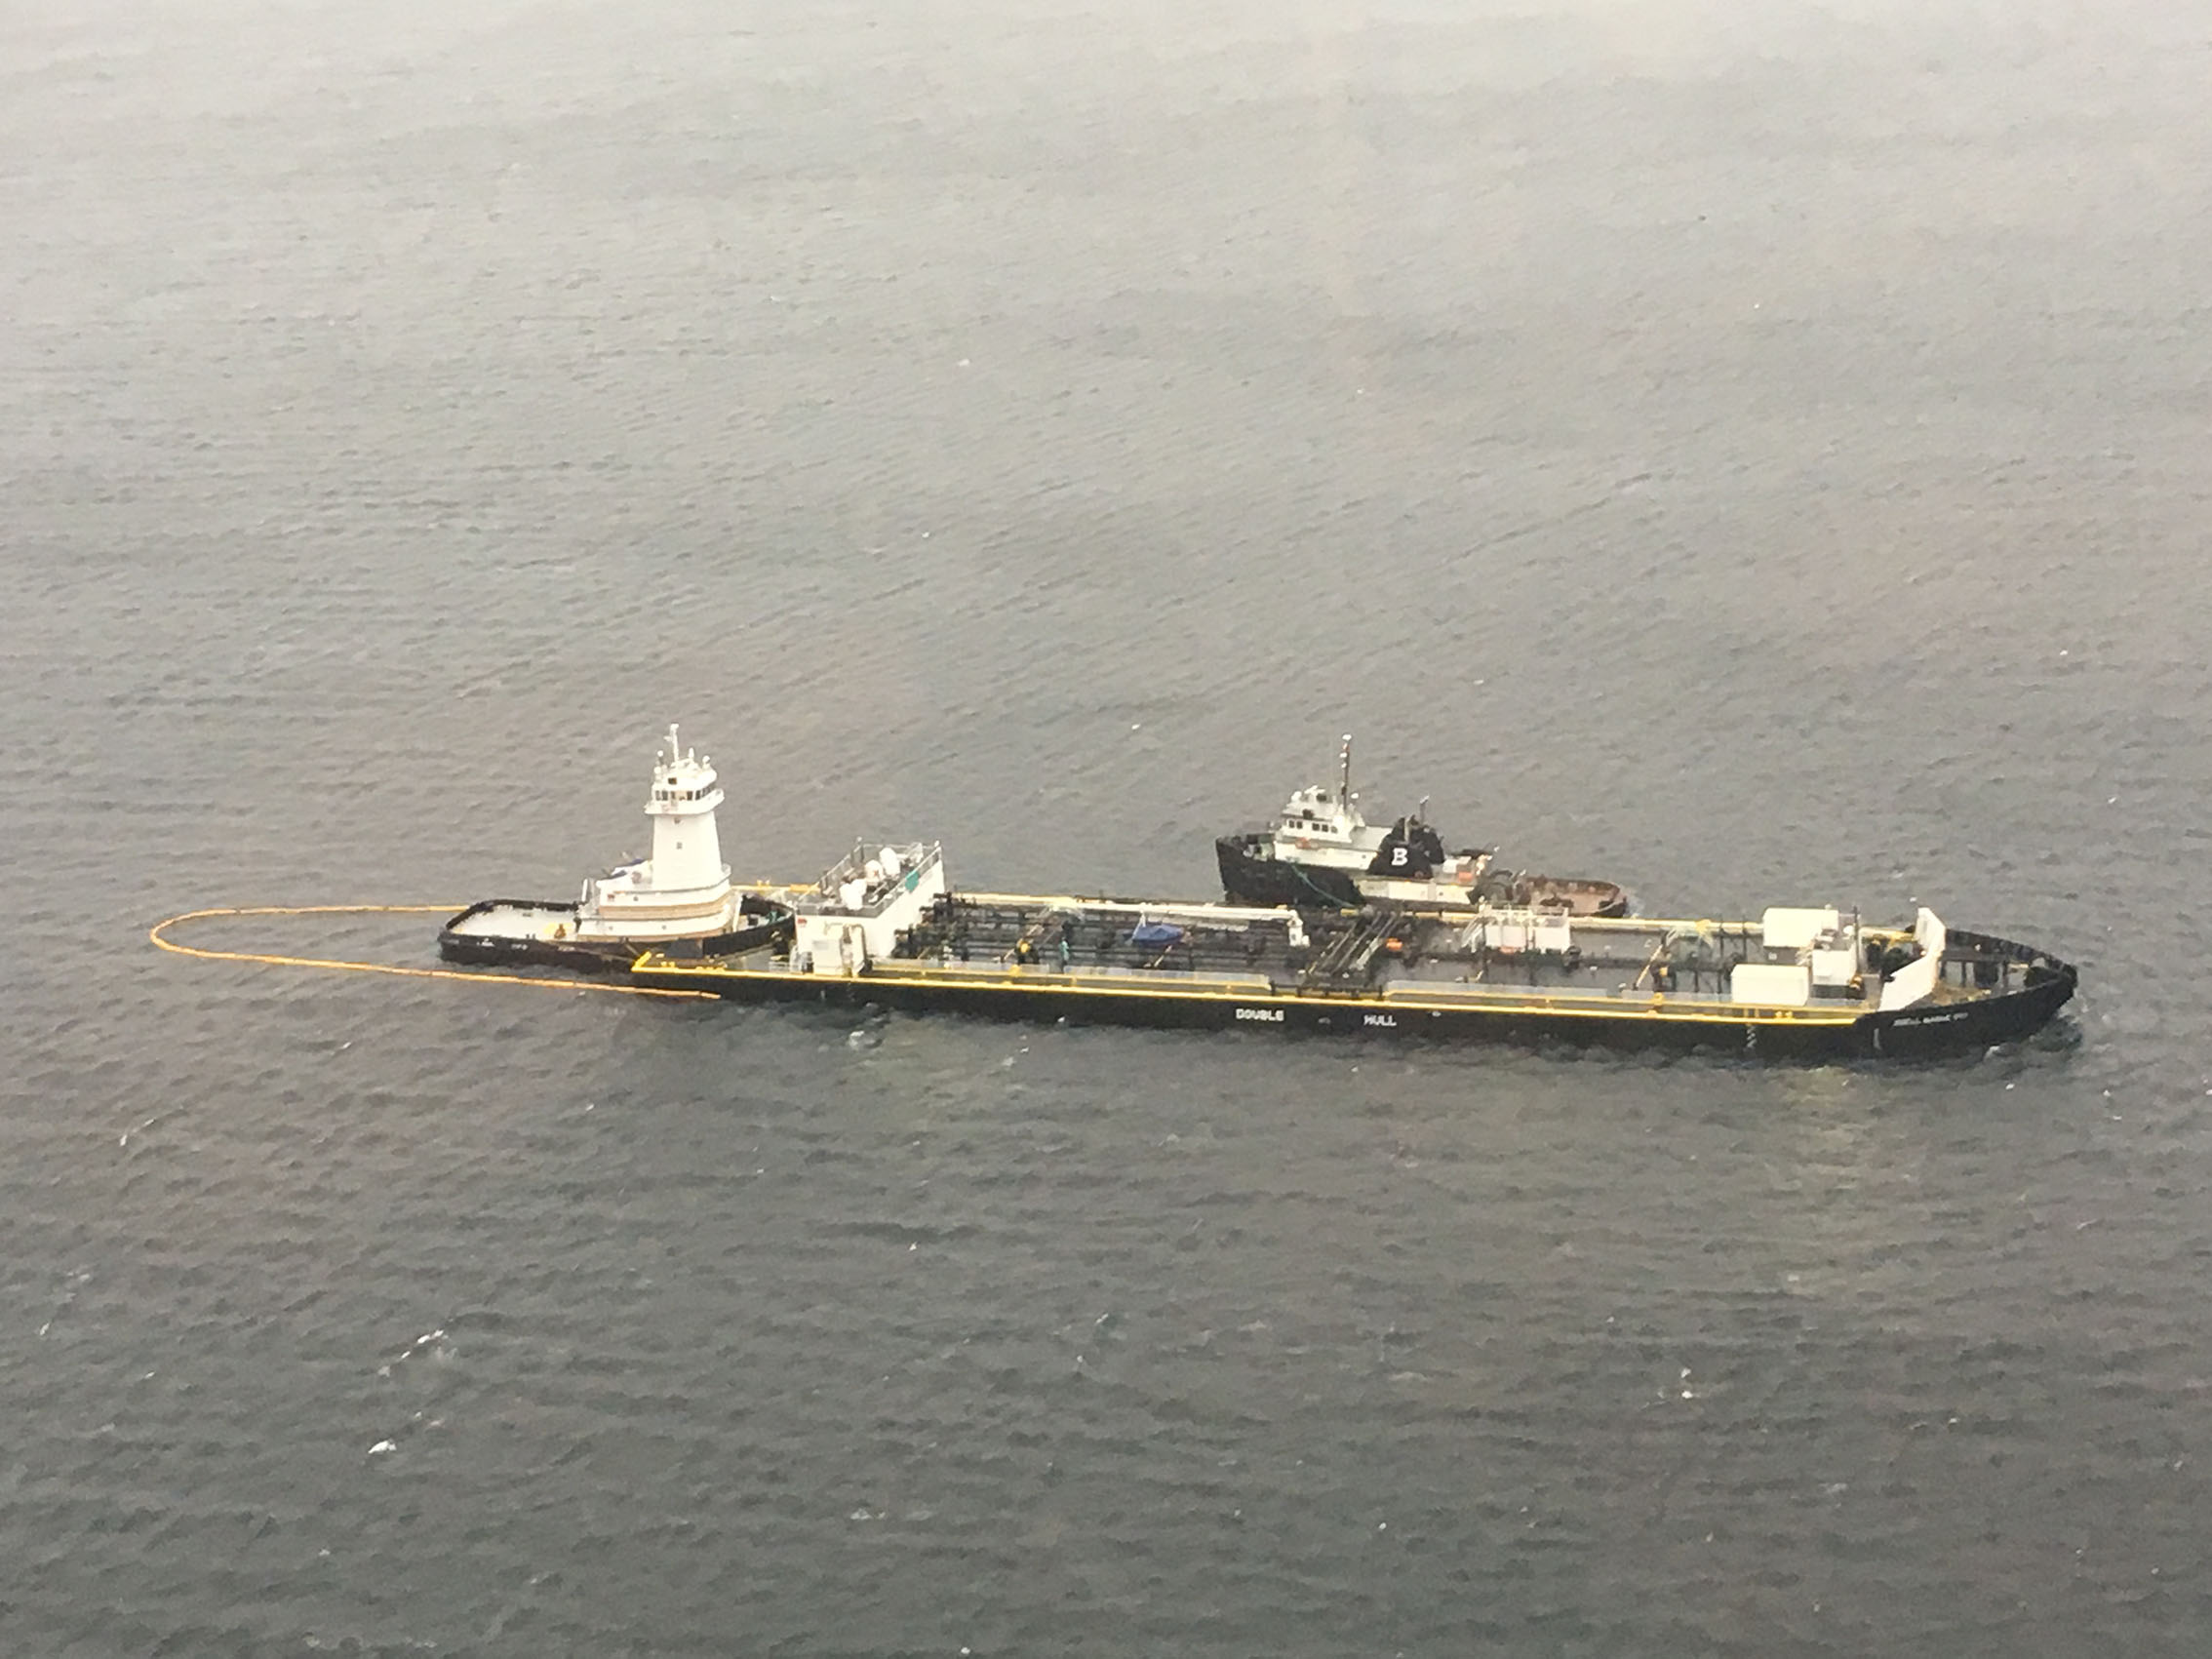 Jake Shearer and fuel barge anchored in Norman Morrison Bay